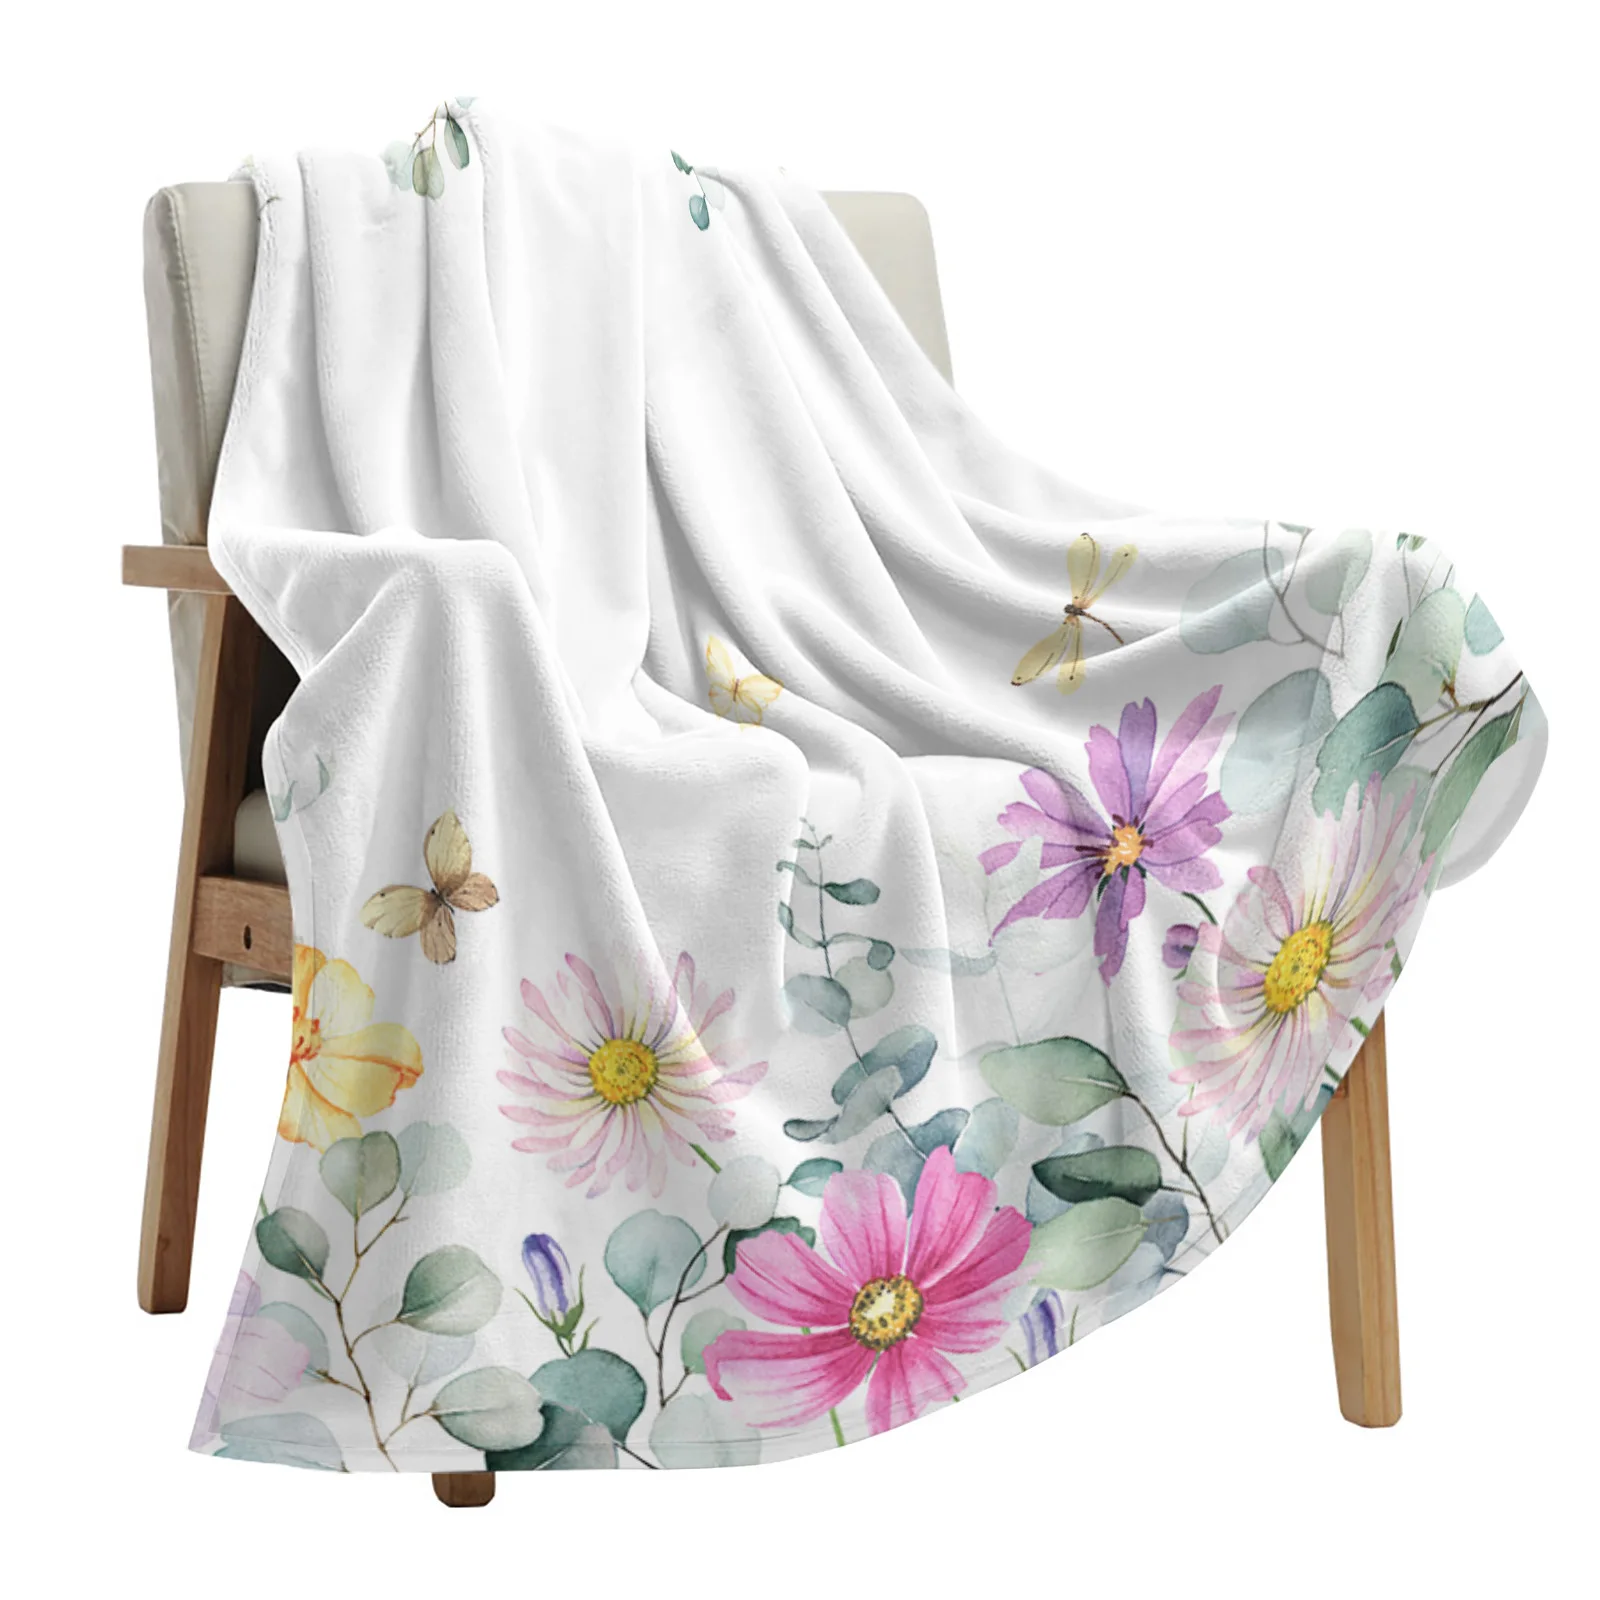 

Idyllic Wildflower Leaves Throws Blankets for Sofa Bed Winter Soft Plush Warm Sofa Throw Blanket Holiday Gifts